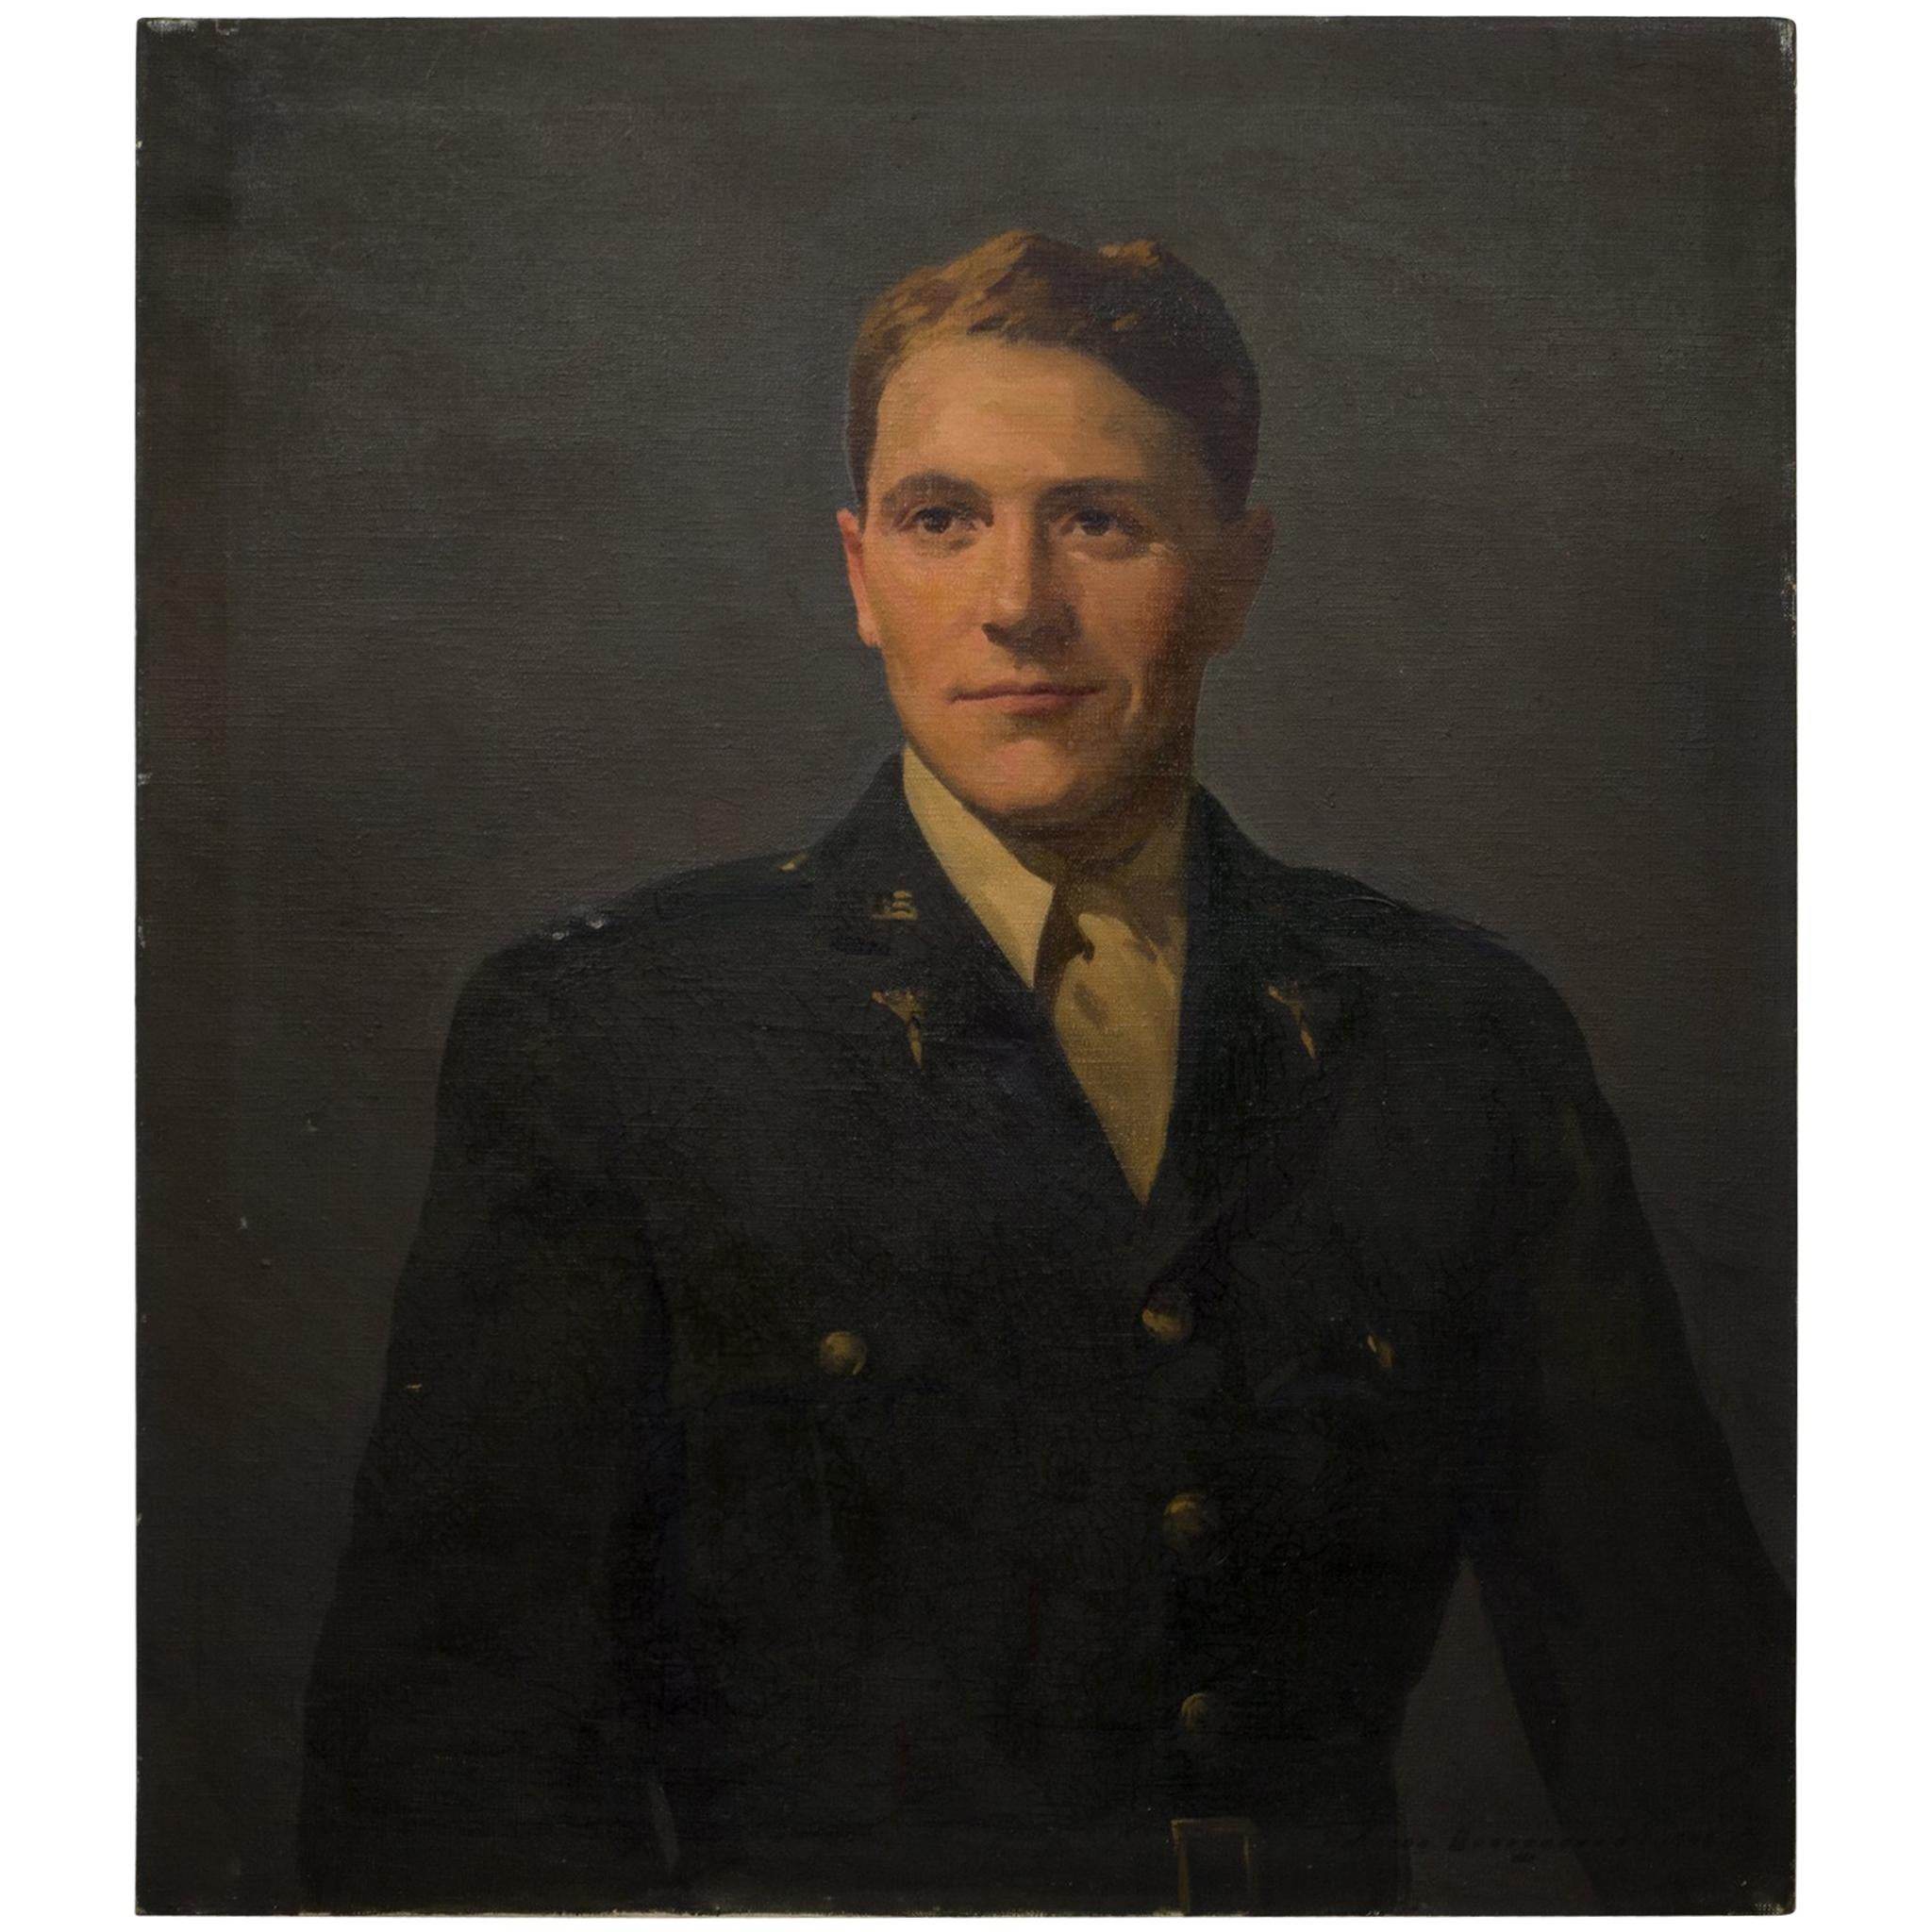 Untitled Oil on Canvas Portrait of WWII Serviceman, circa 1940